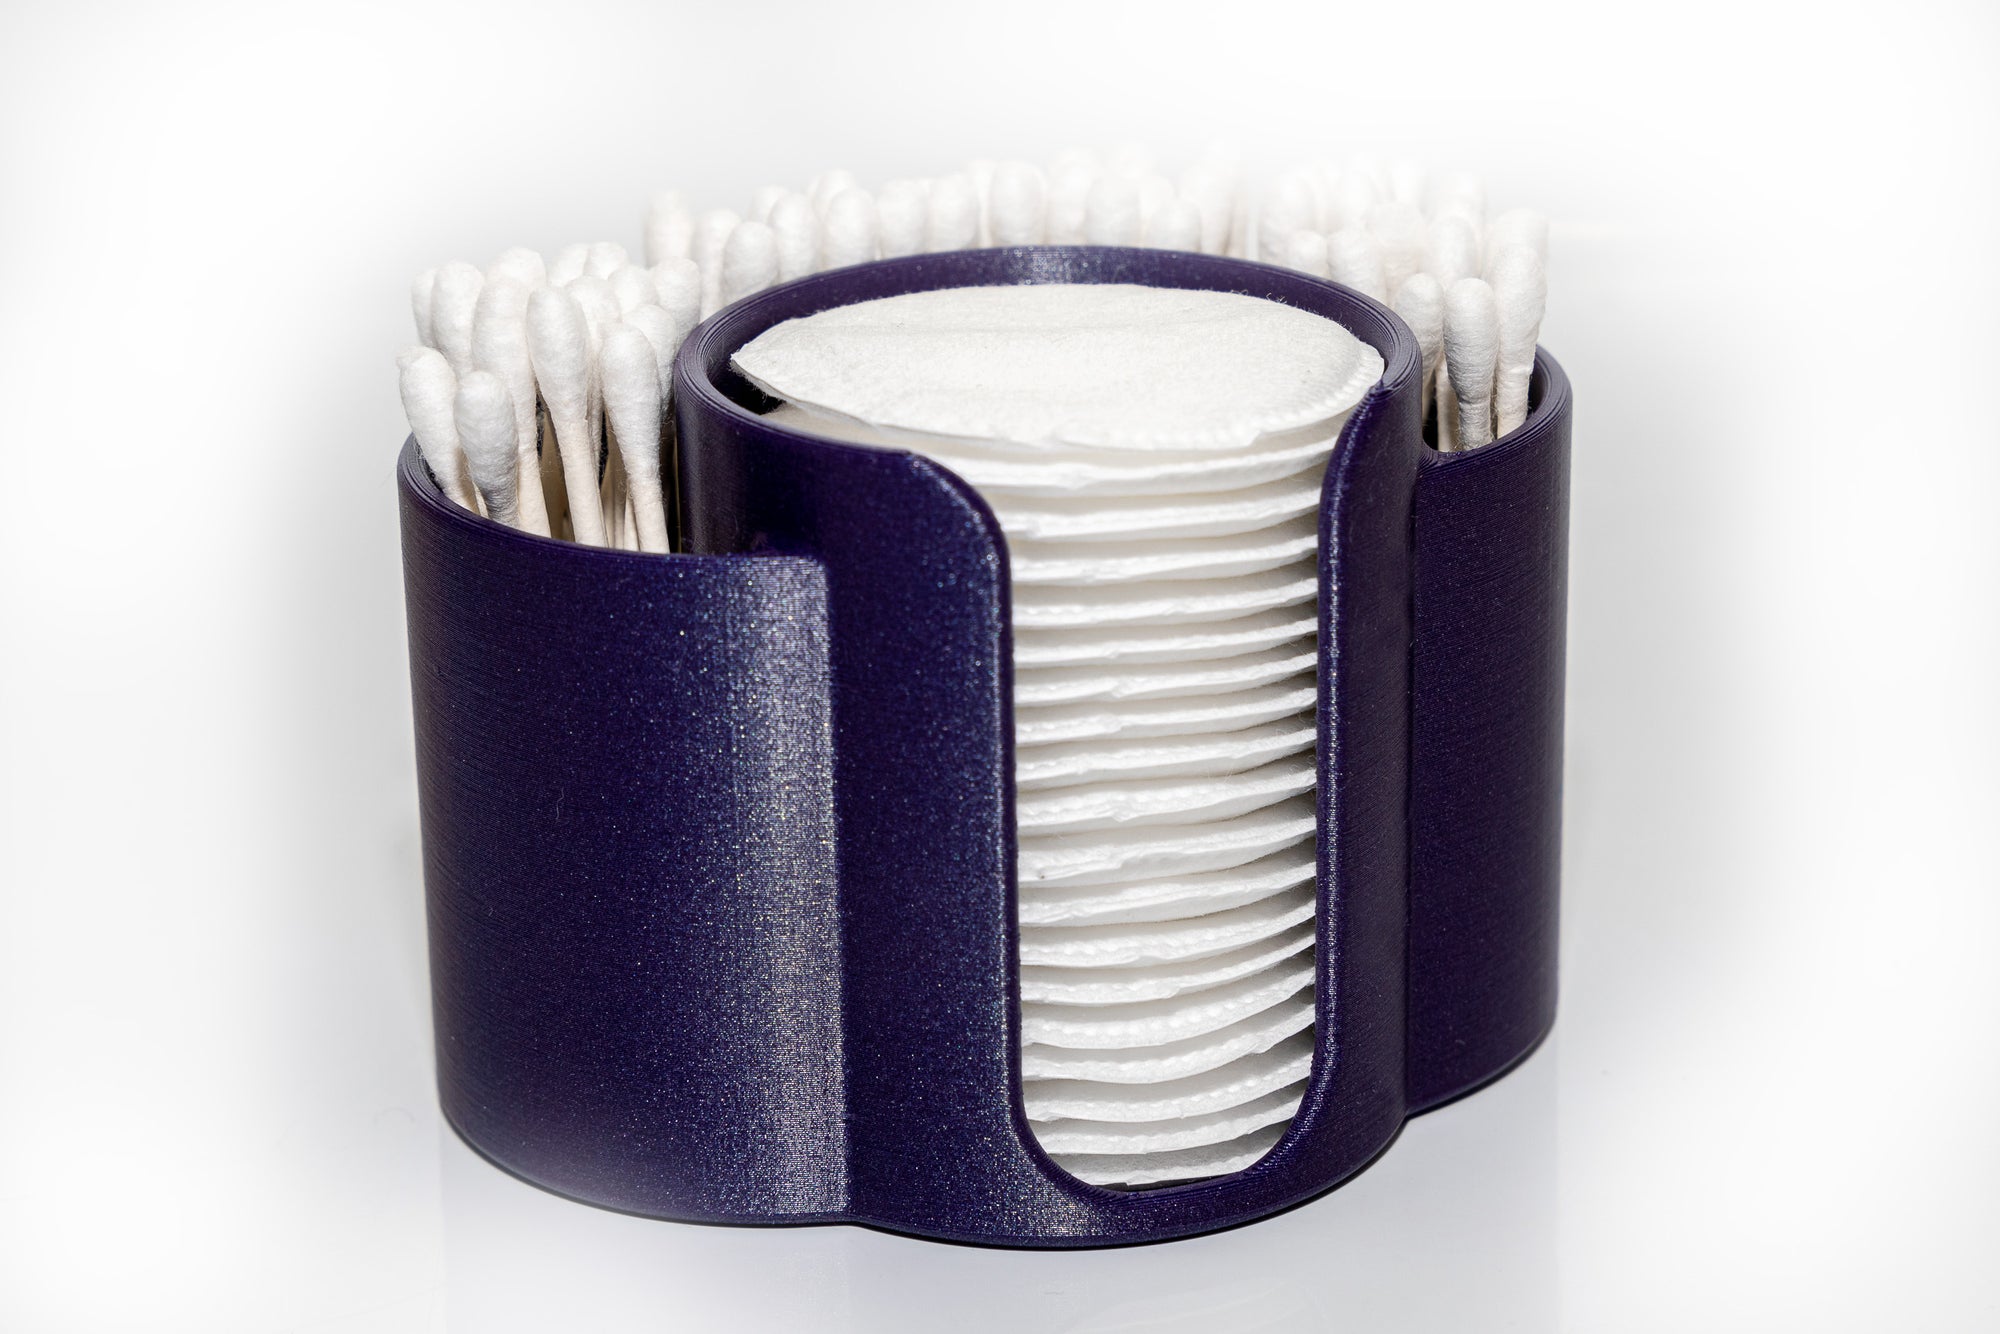 Cotton Caddy - Multiple Colors Available